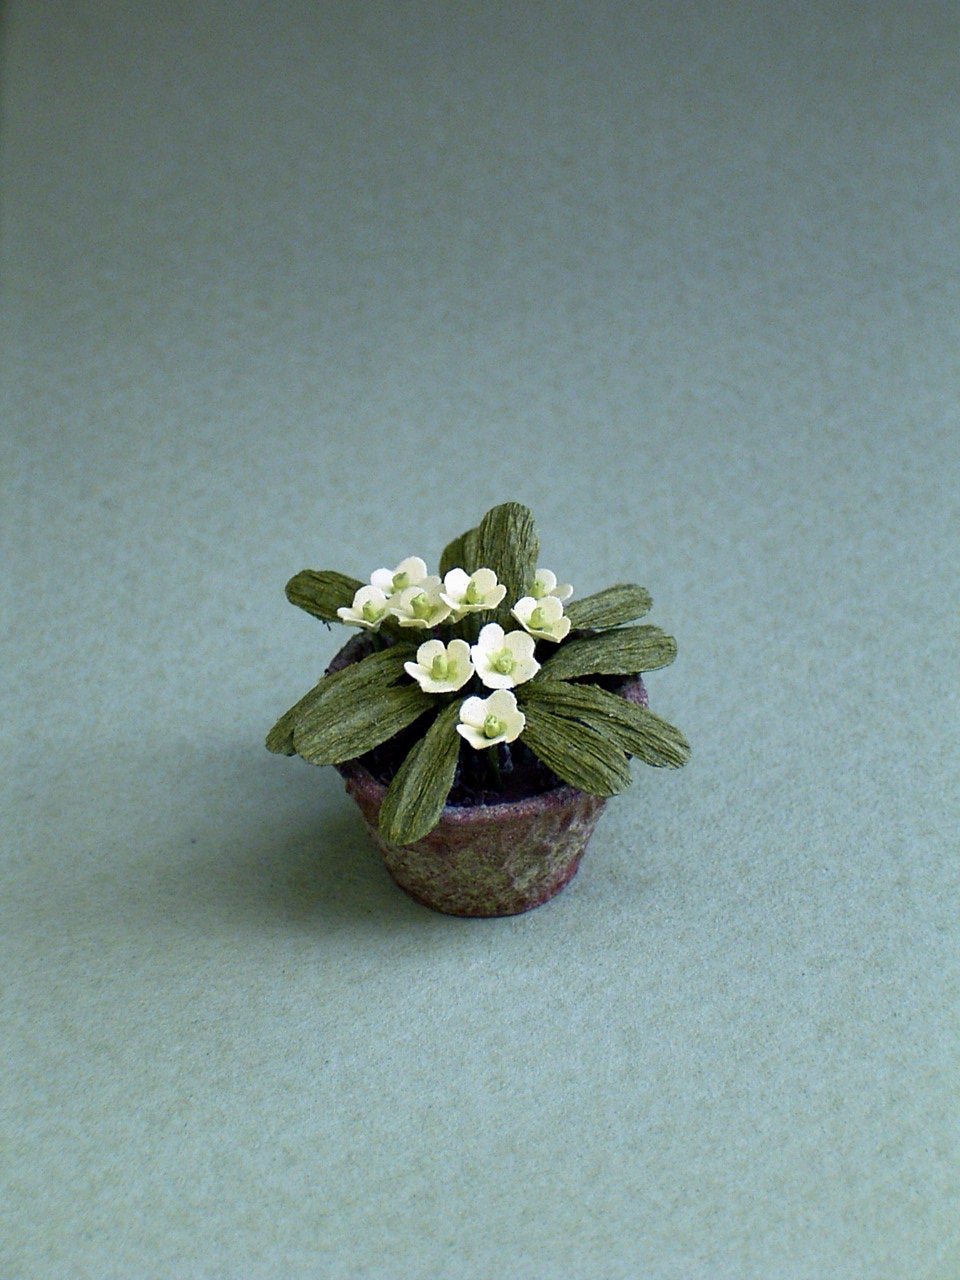 Primrose Flower Kit  for 1/12th scale Dollhouses, Florists and Miniature Gardens